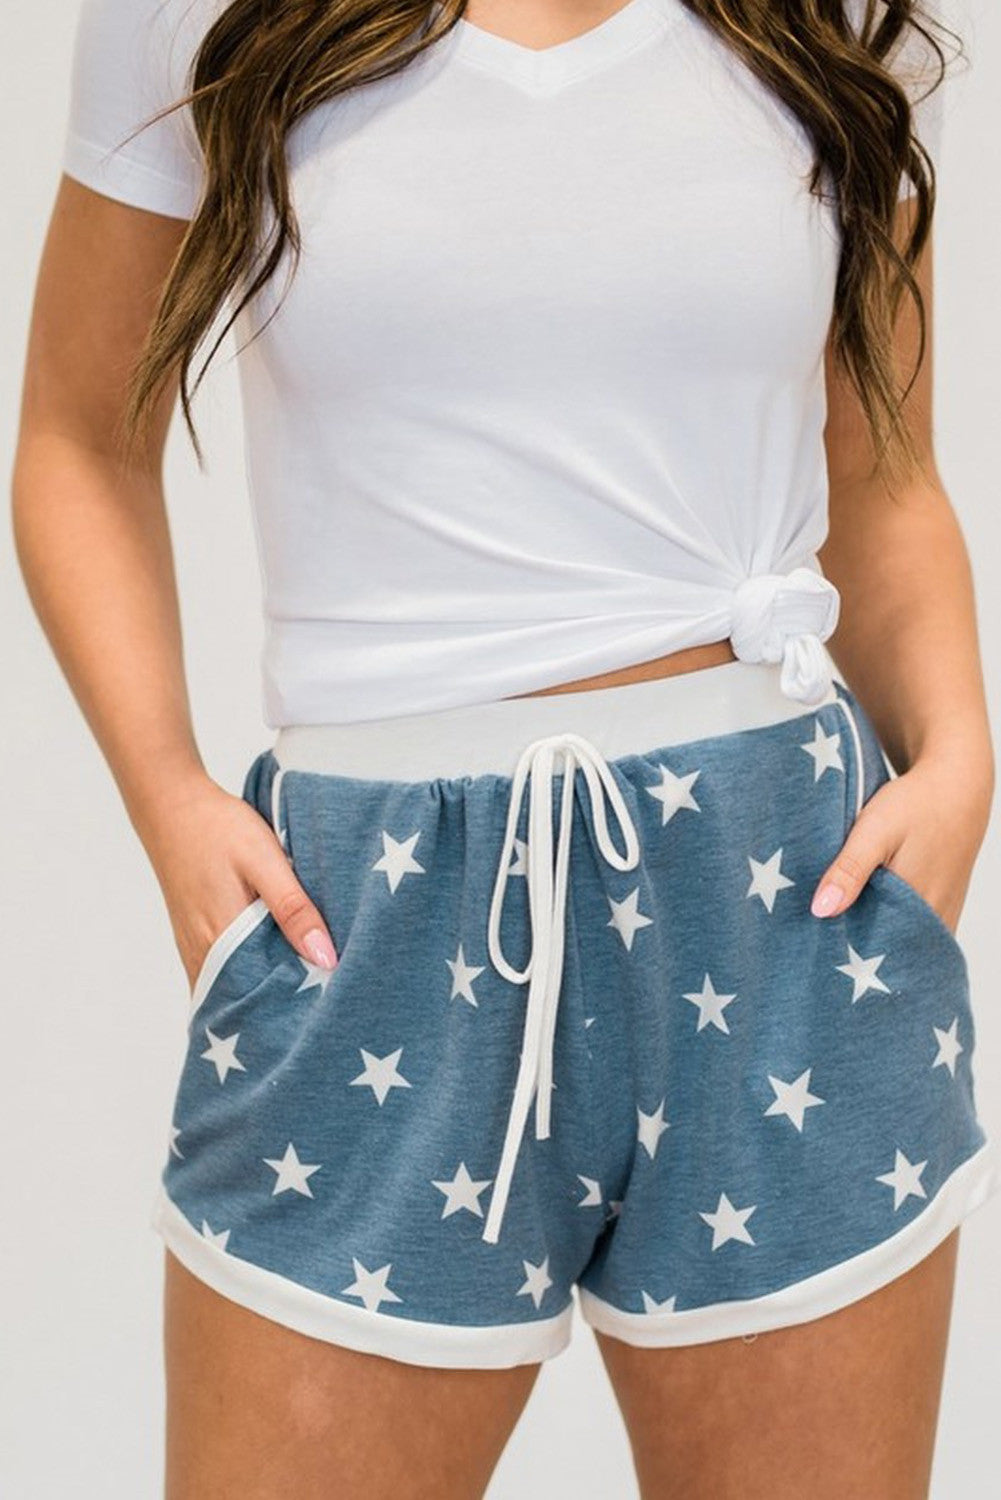 Star Shorts in Blue - Southern Grace Creations